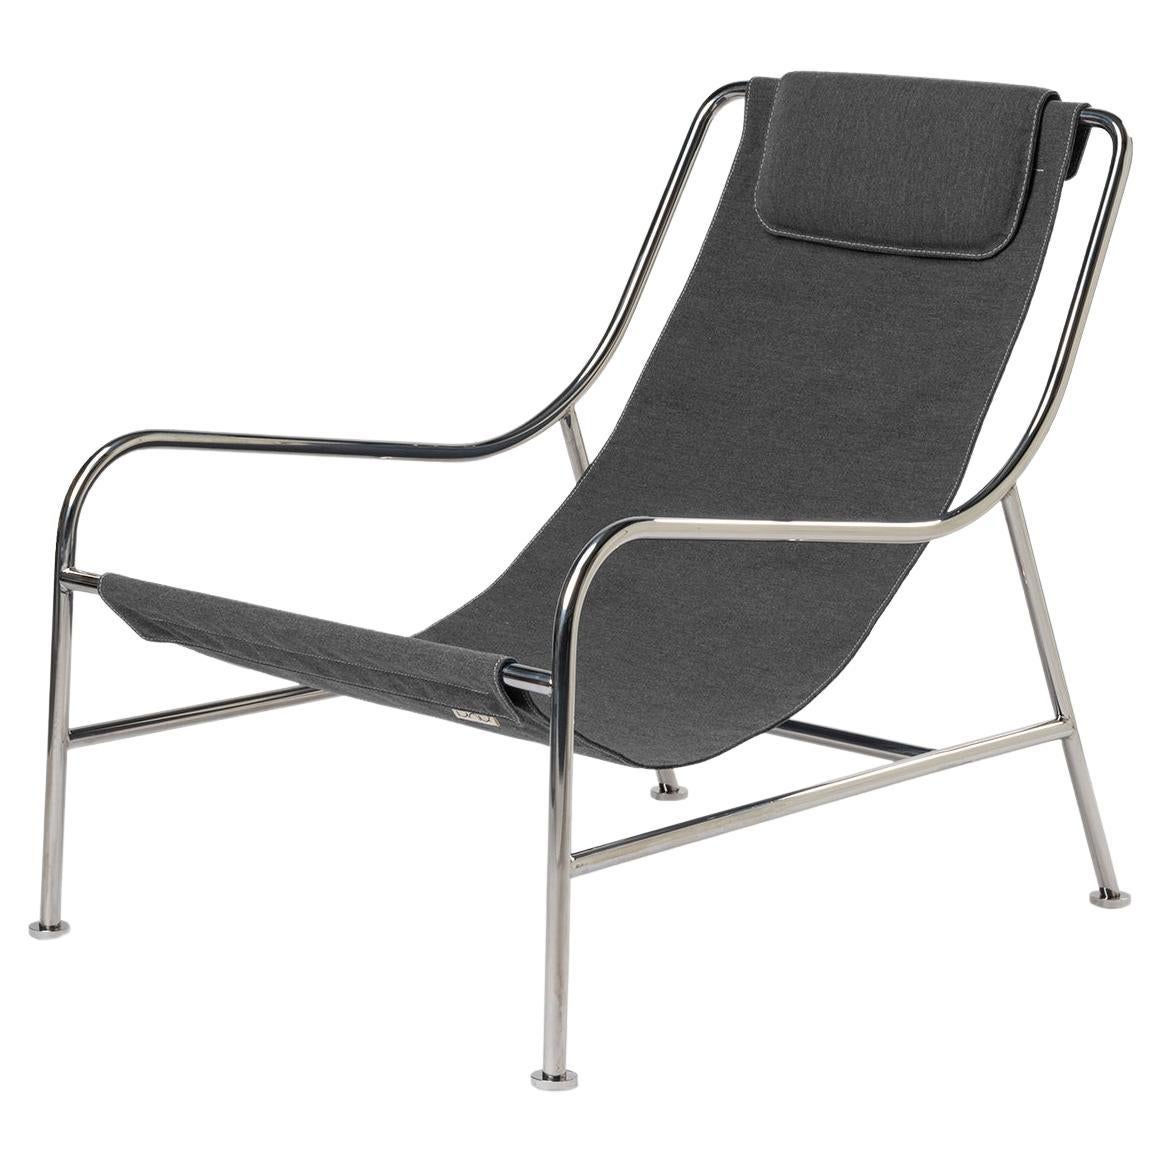 Minimalist Outdoor Lounge Chair in "Slate" Fabric and Polished Stainless Steel